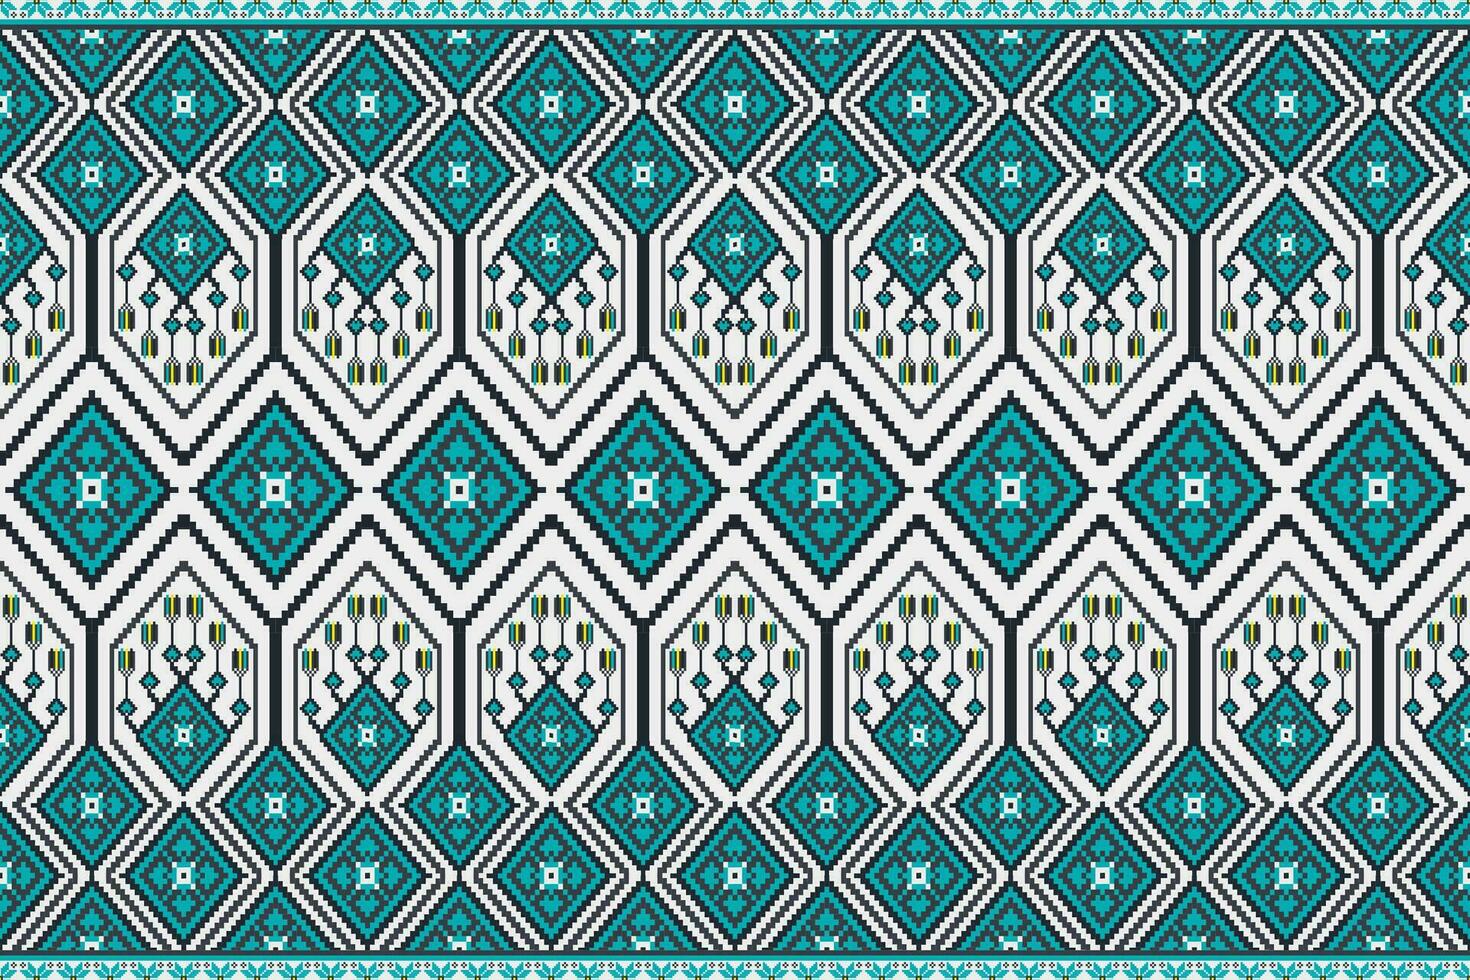 Ethnic Garland Pixel Art Seamless Pattern.  Vector design for fabric, carpet, tile, embroidery, wallpaper, and background